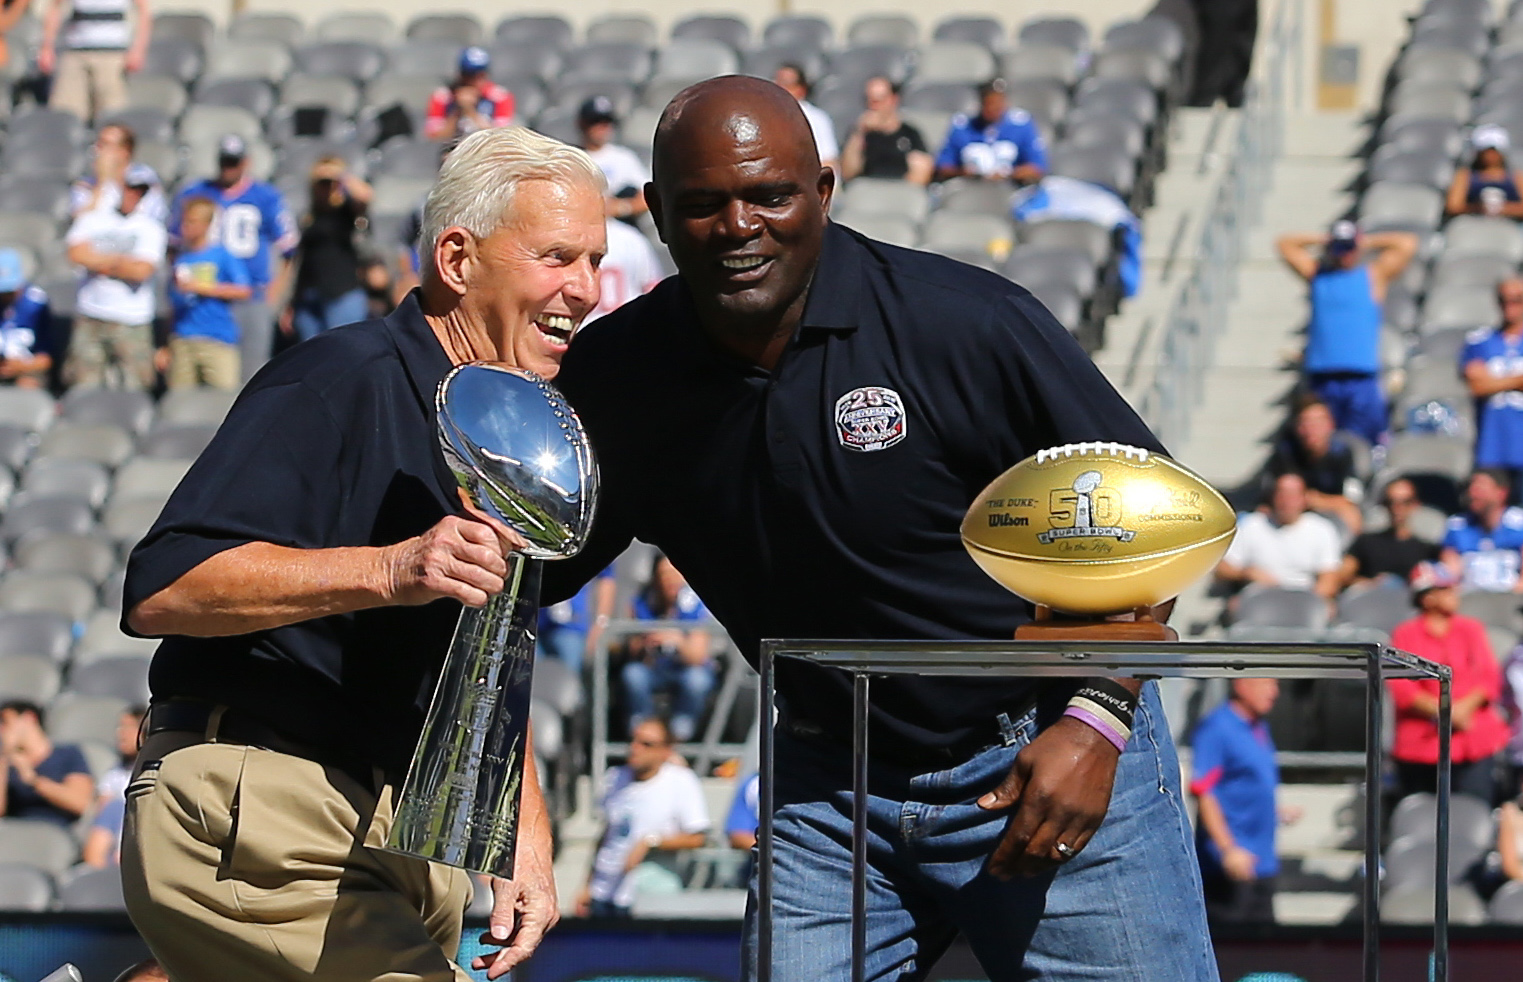 New York Giants Legend Lawrence Taylor Arrested On Suspicion Of DUI 